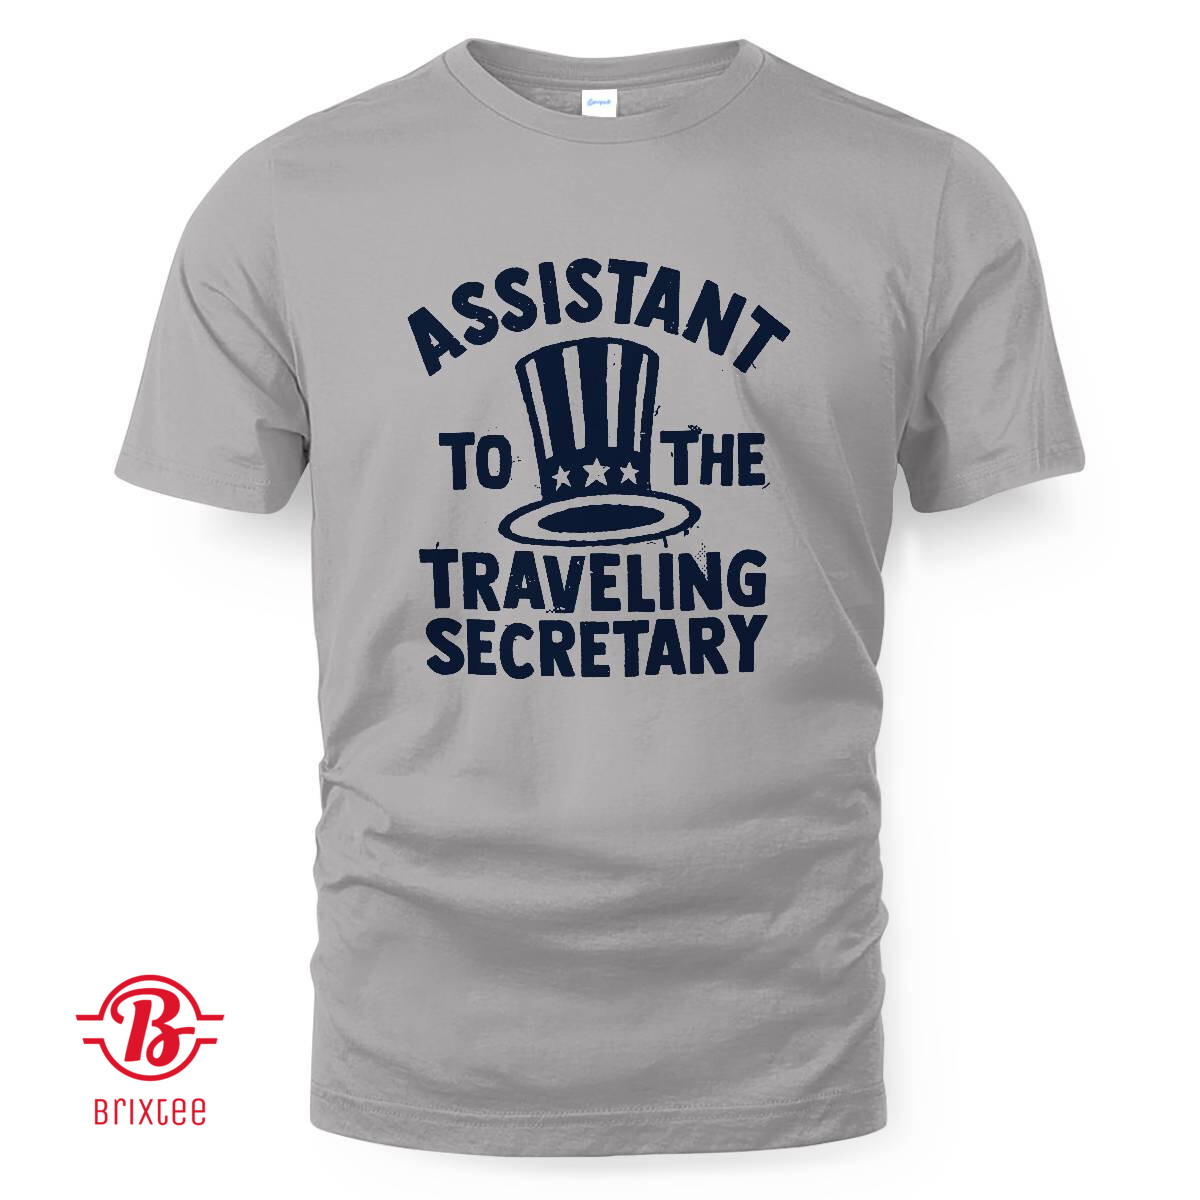 New York Yankees Assistant To The Traveling Secretary T-Shirt and Hoodie